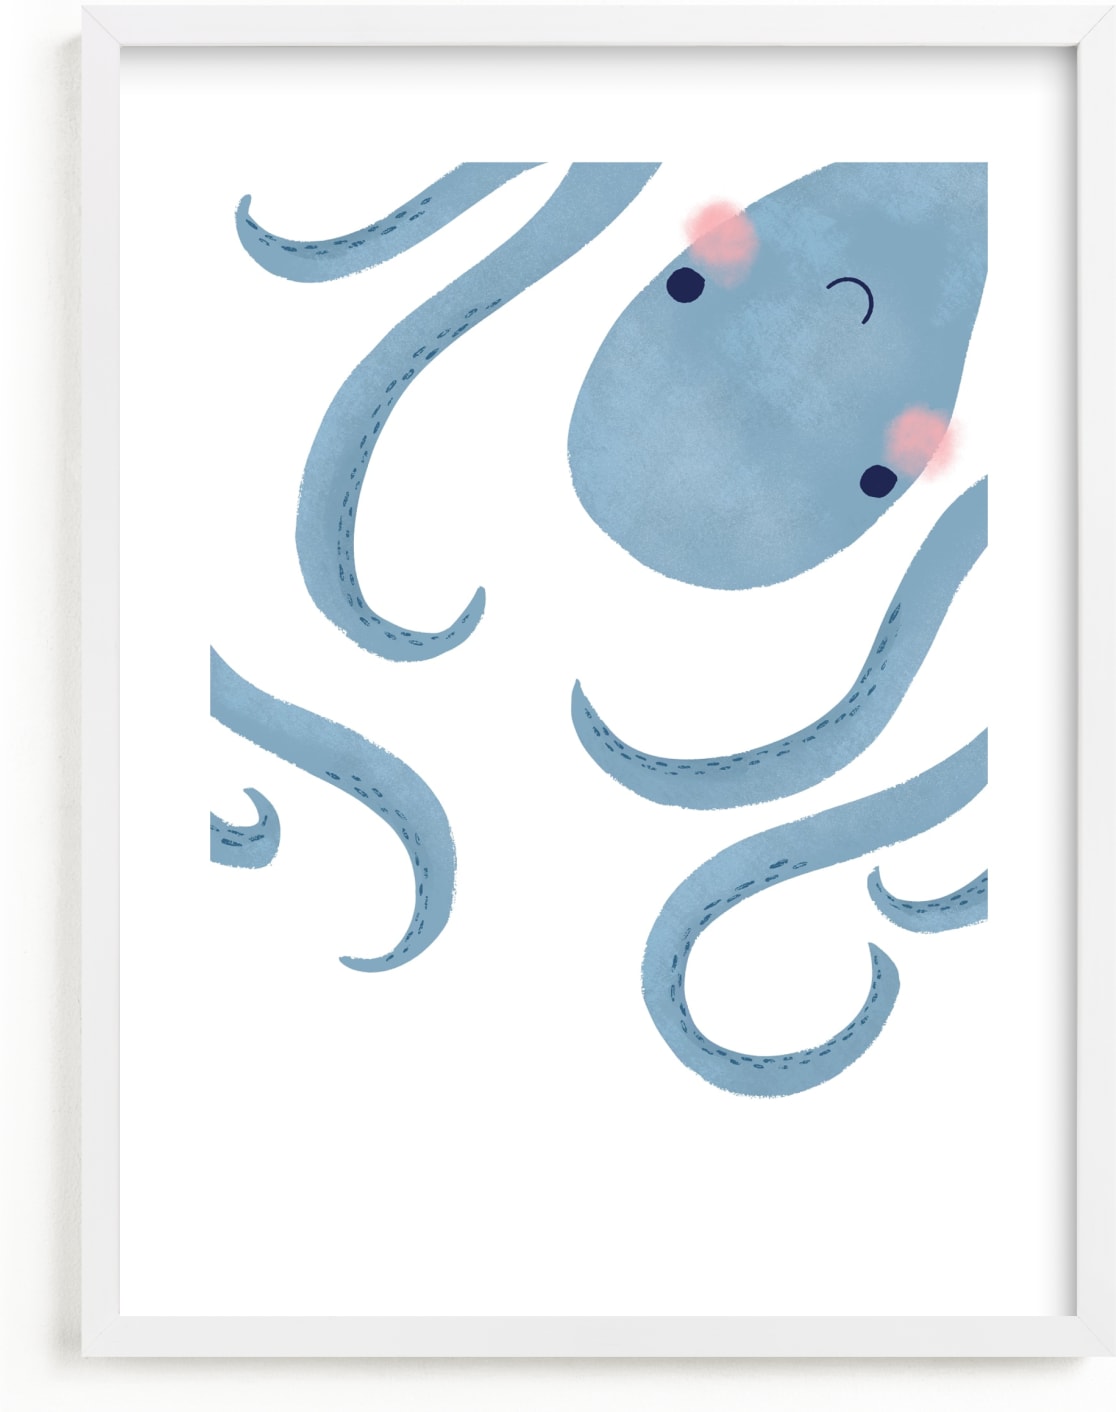 This is a blue art by Jackie Crawford called Little Septopus.